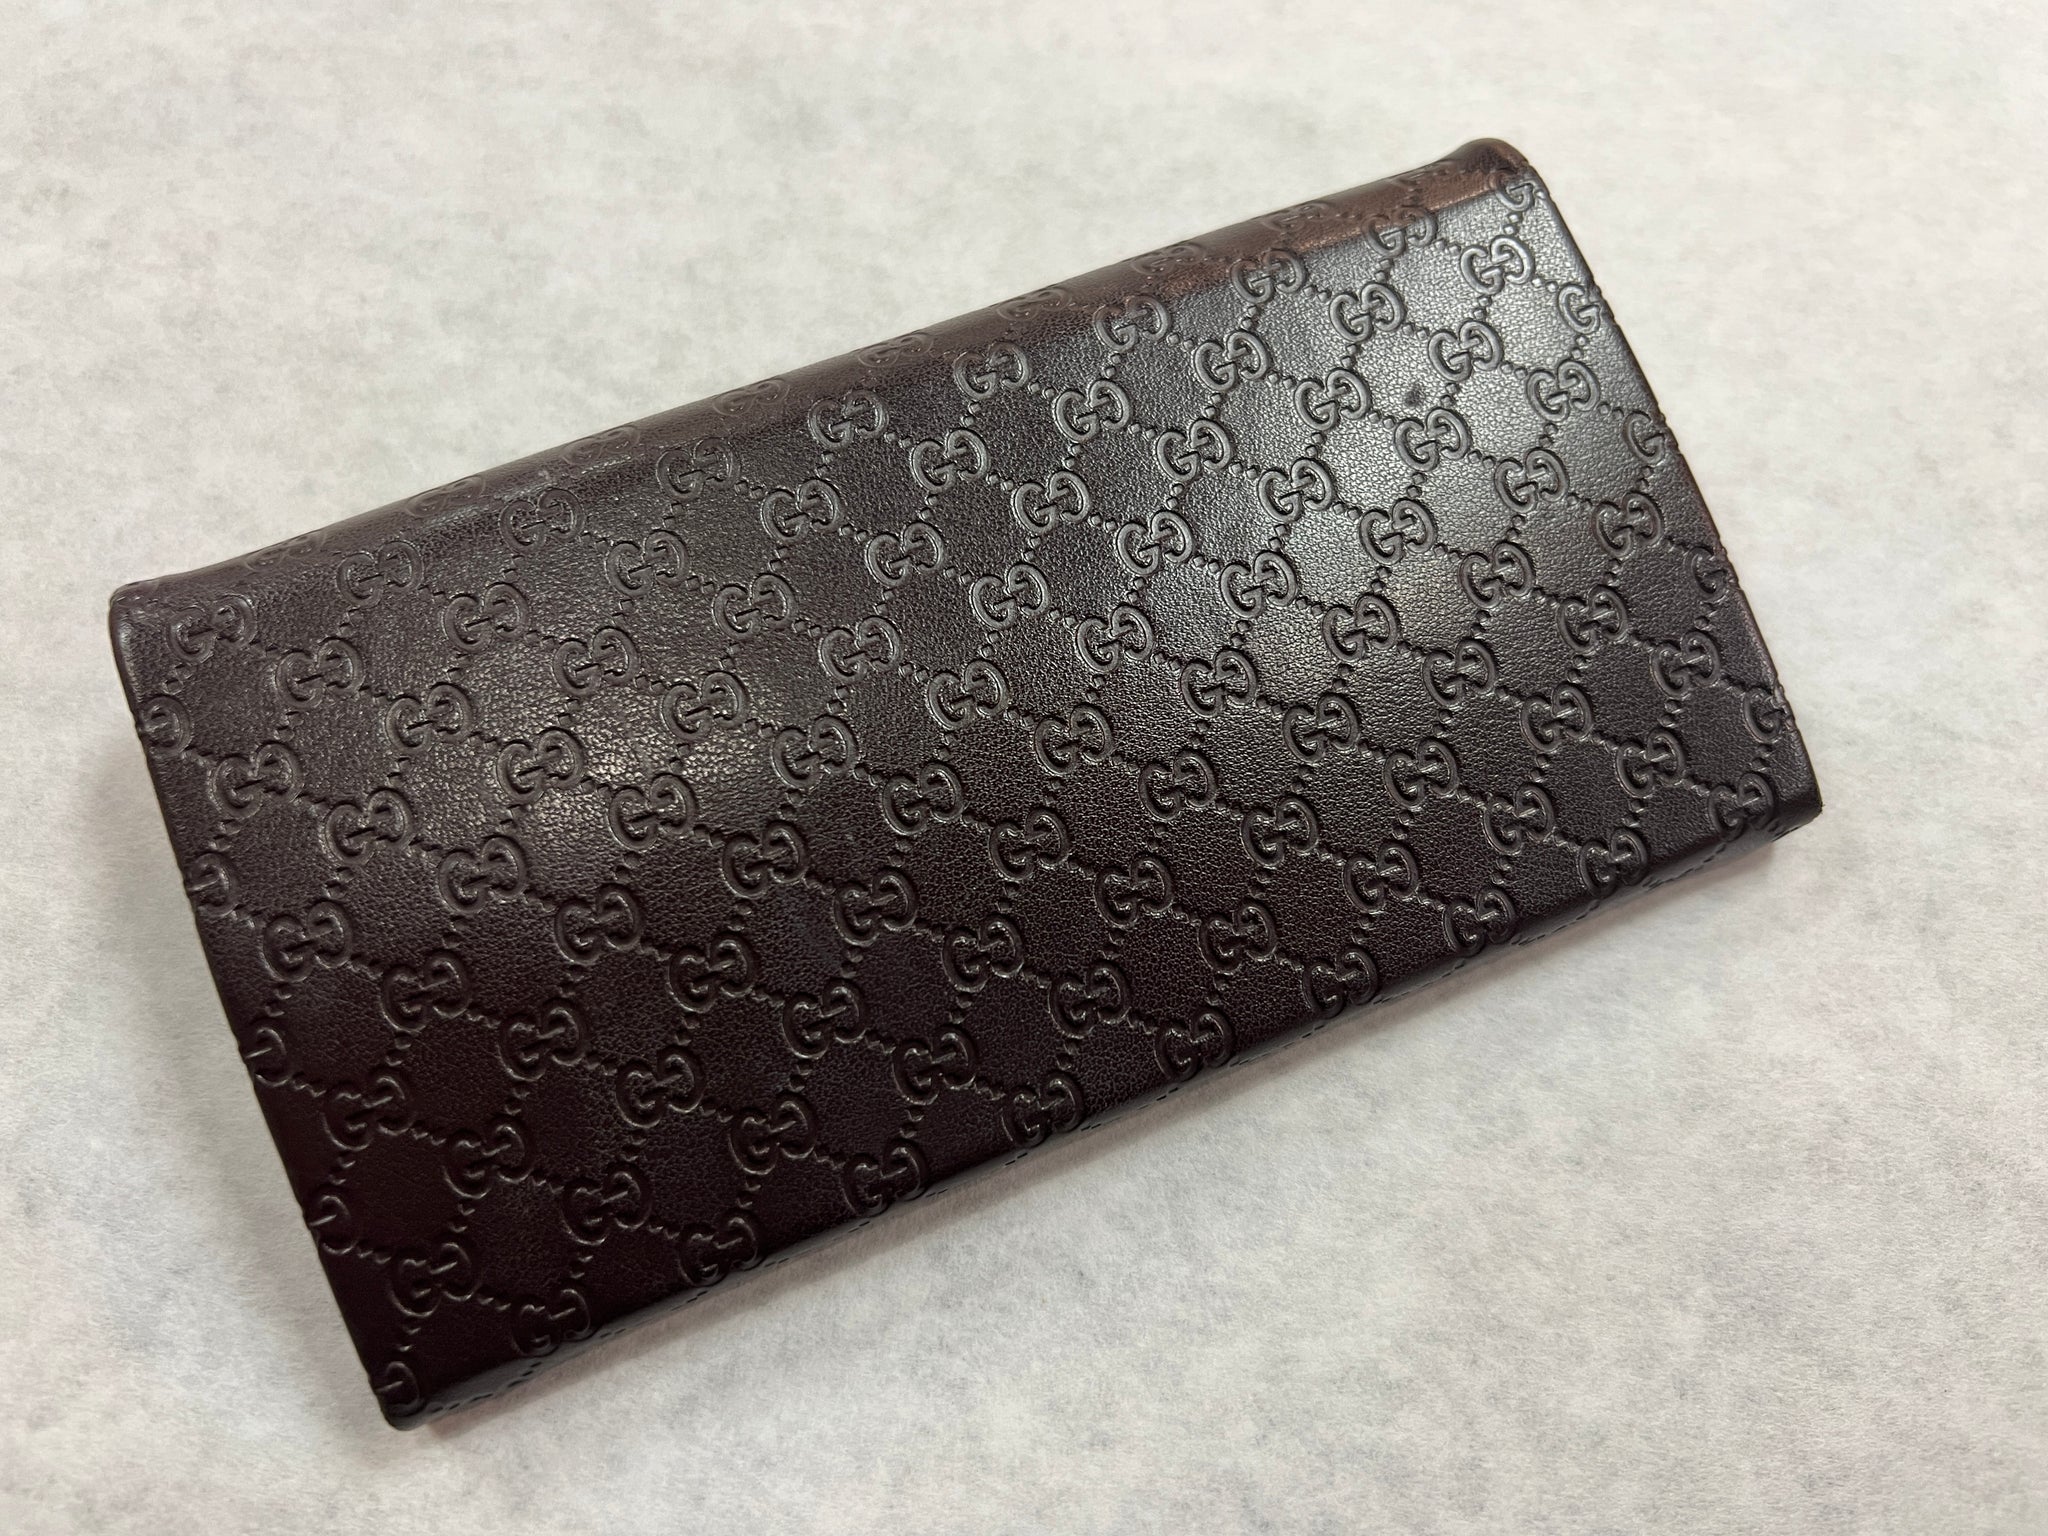 GUCCI Monogram Chocolate Leather GG Sunglasses Case Foldable MADE IN ITALY